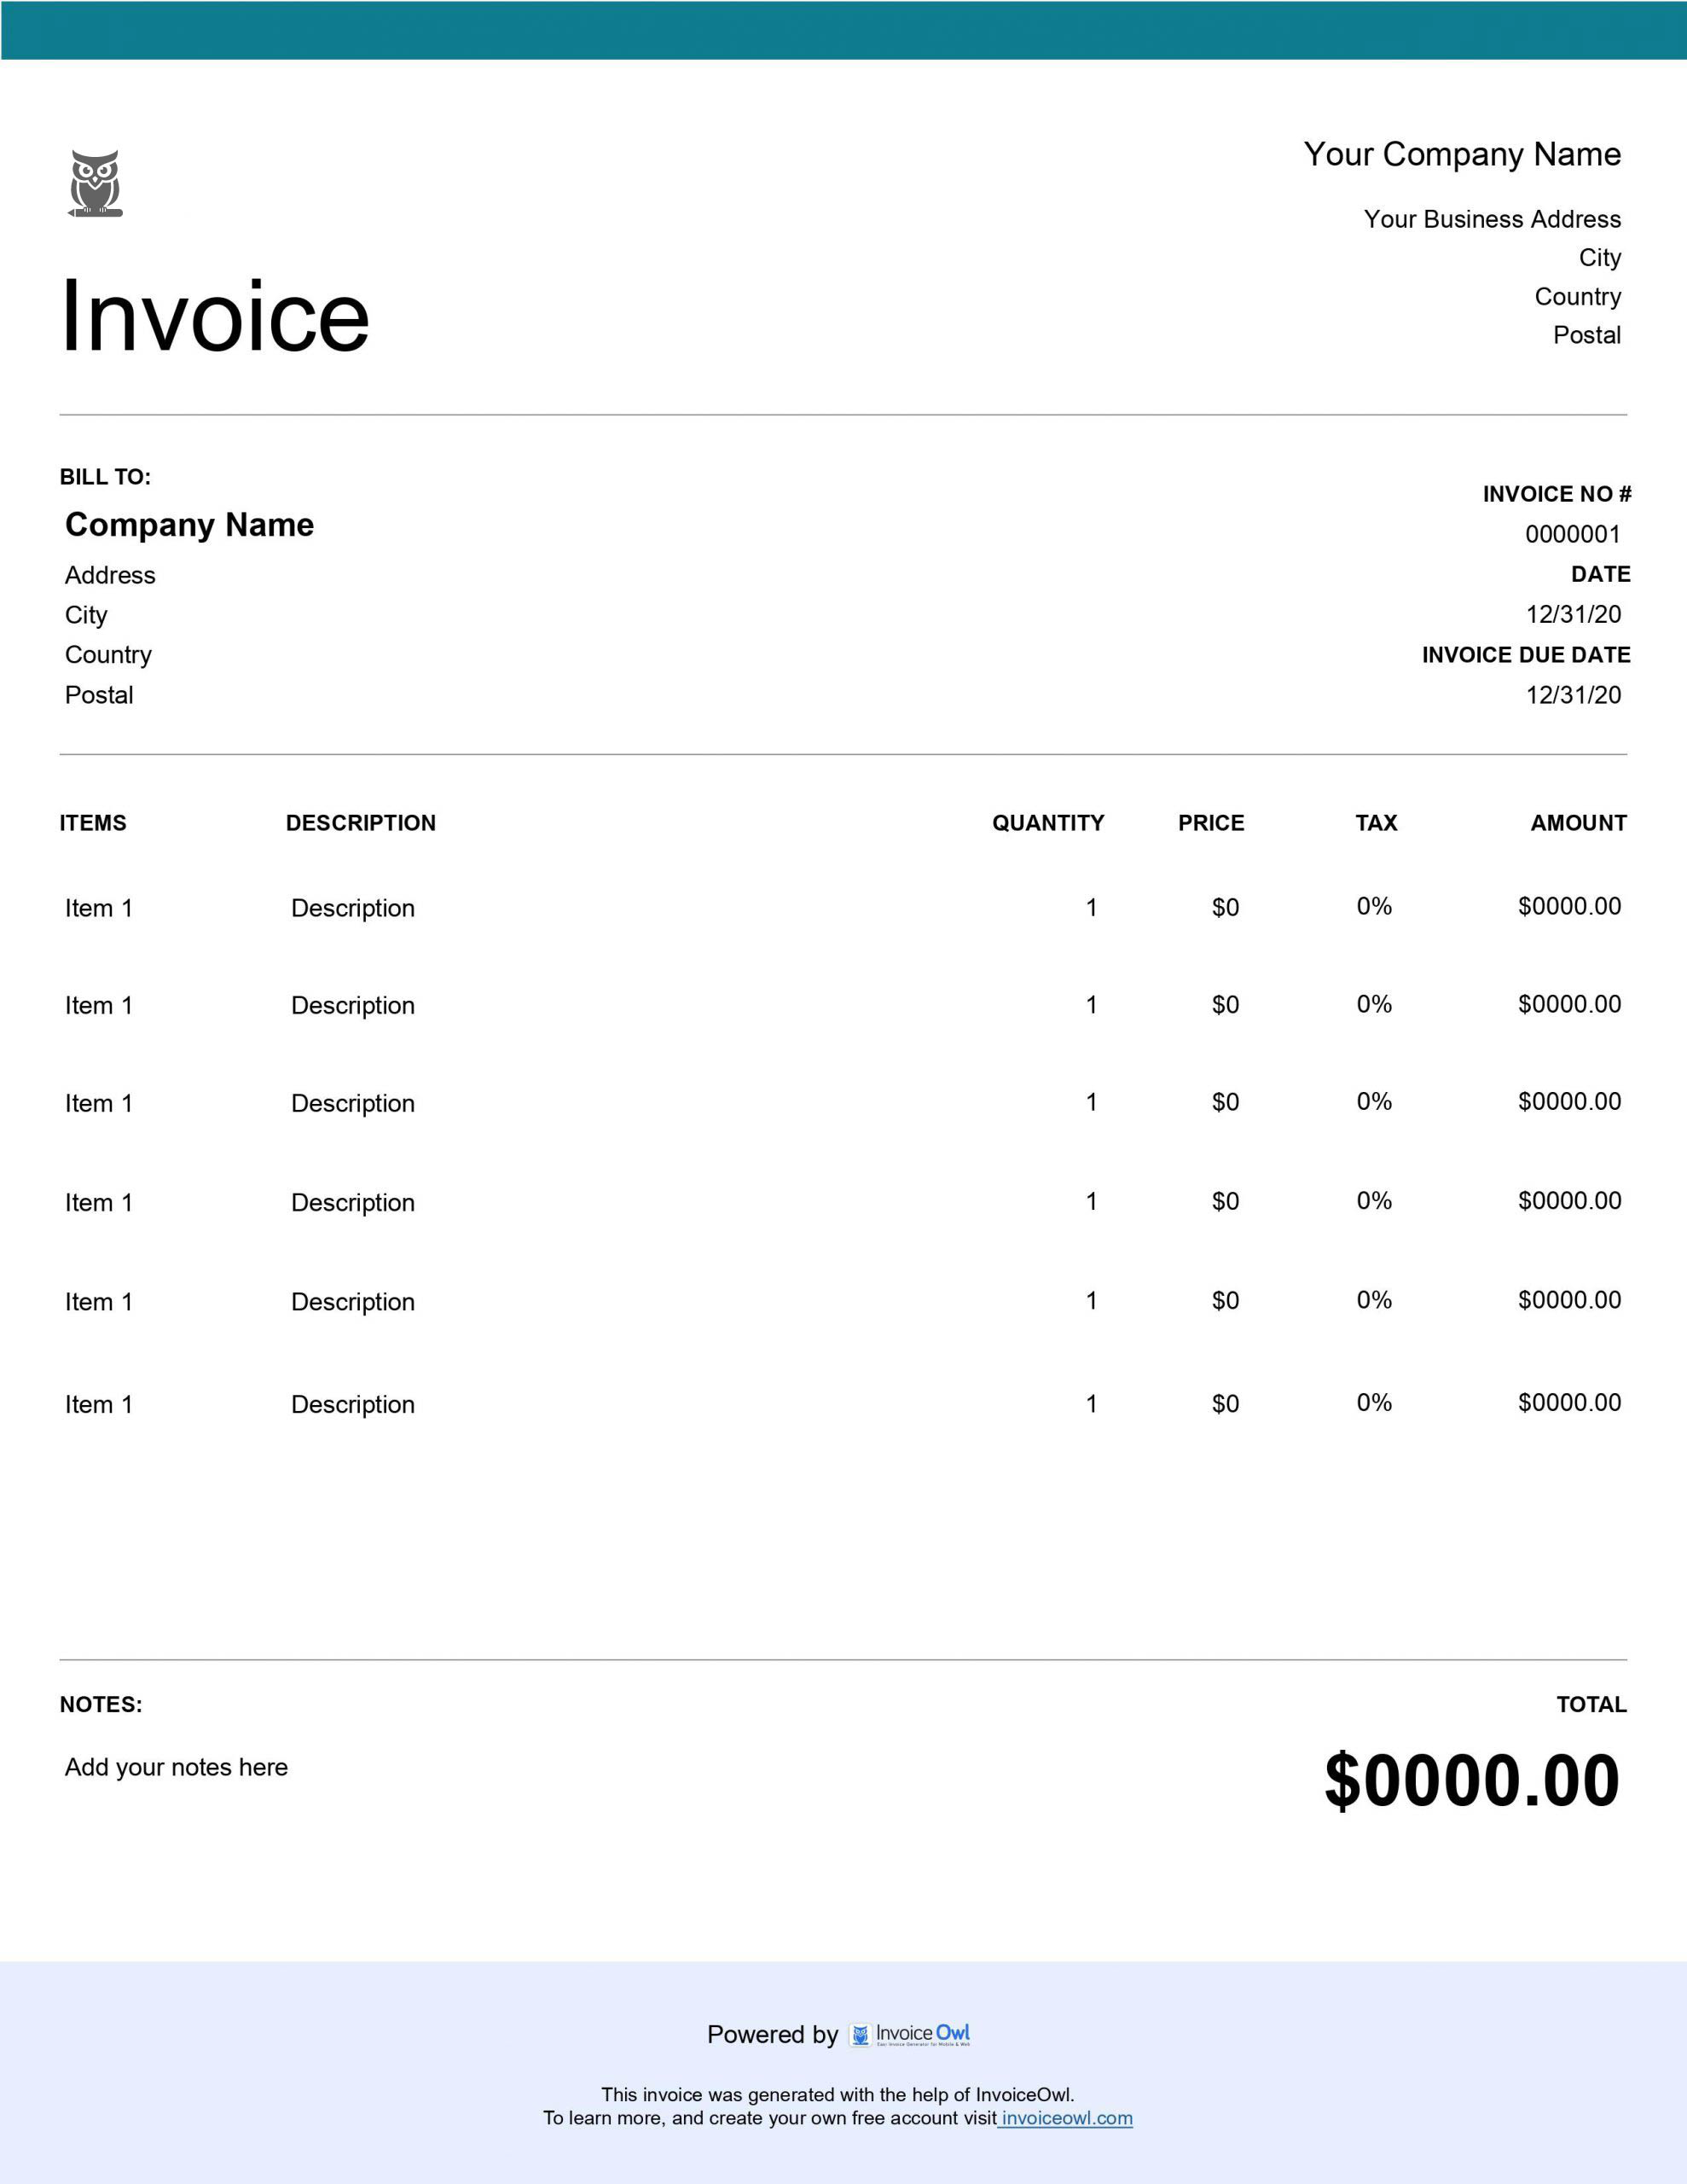 Download free invoice template